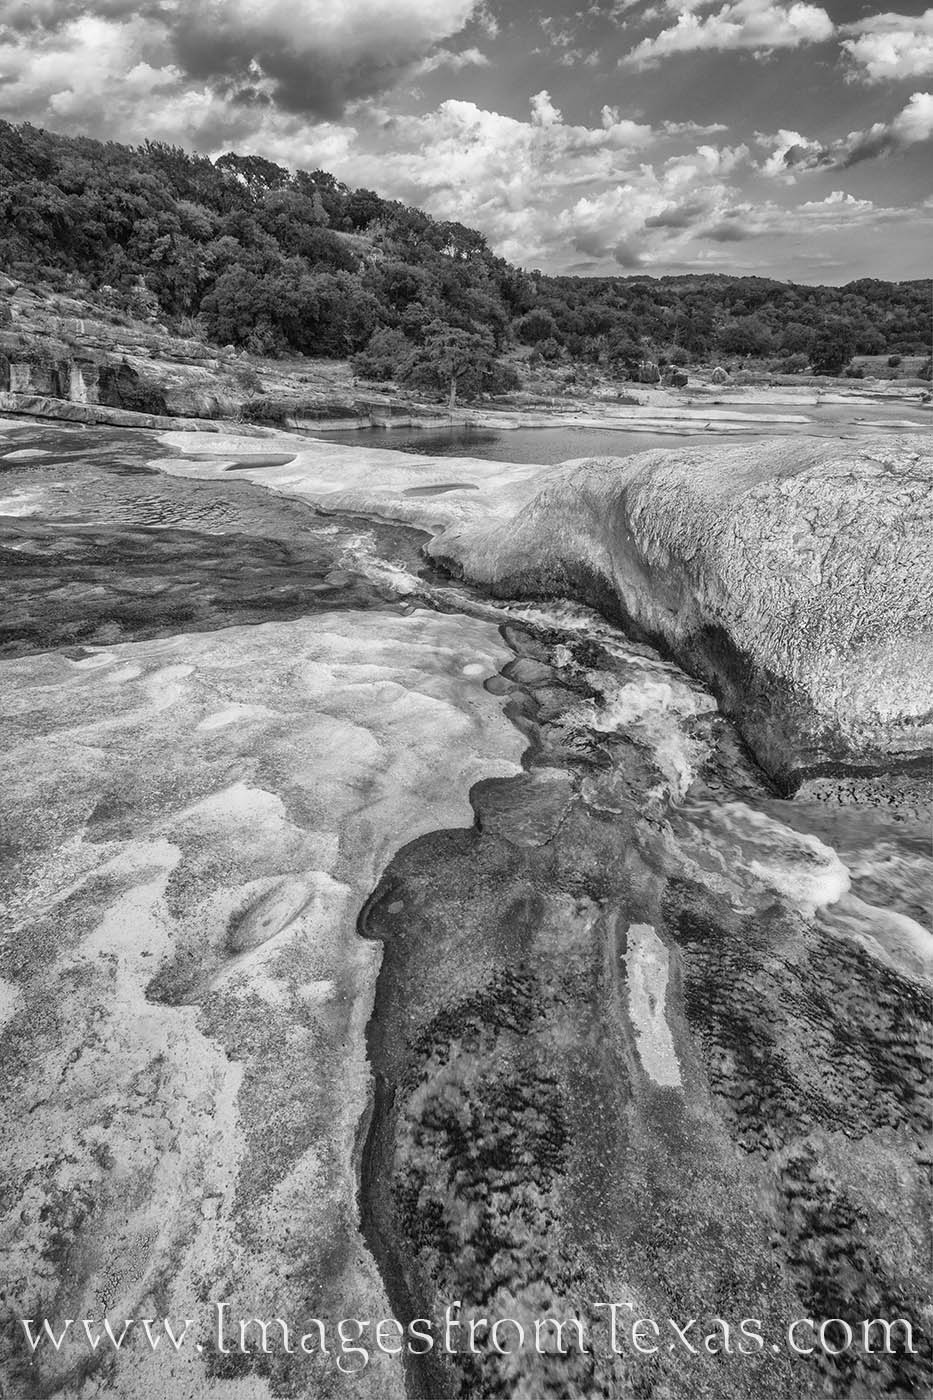 A contrast of limestone and water, black and white, is evident in this afternoon photograph from Padernales Falls State Park....